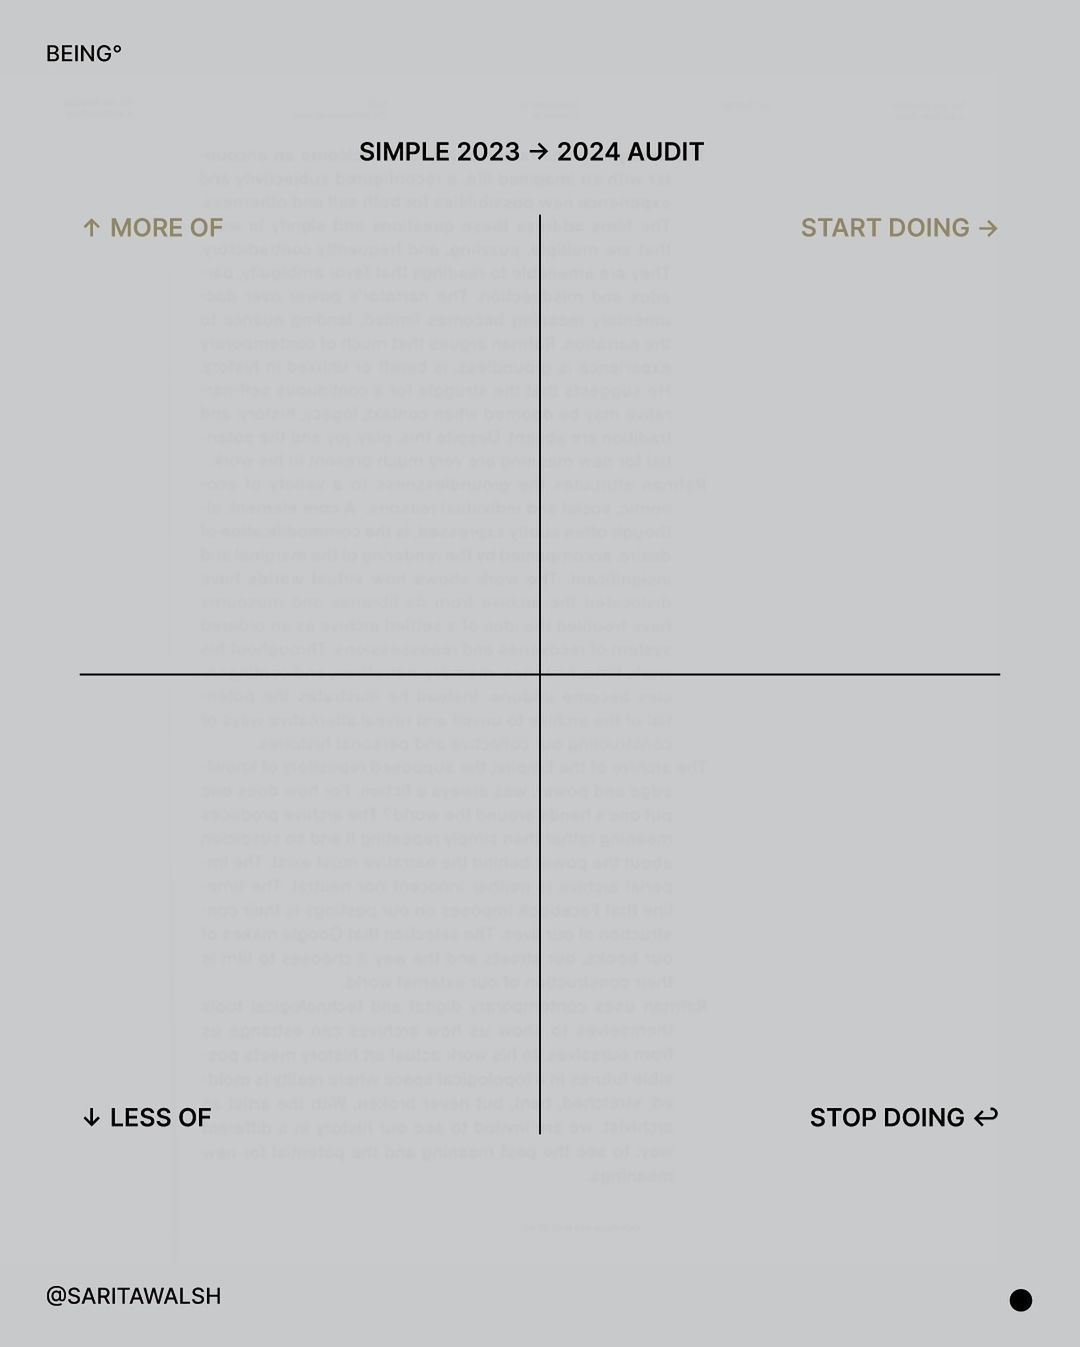 A yearly audit with four quadrants: More of, Less of, Start doing, Stop doing